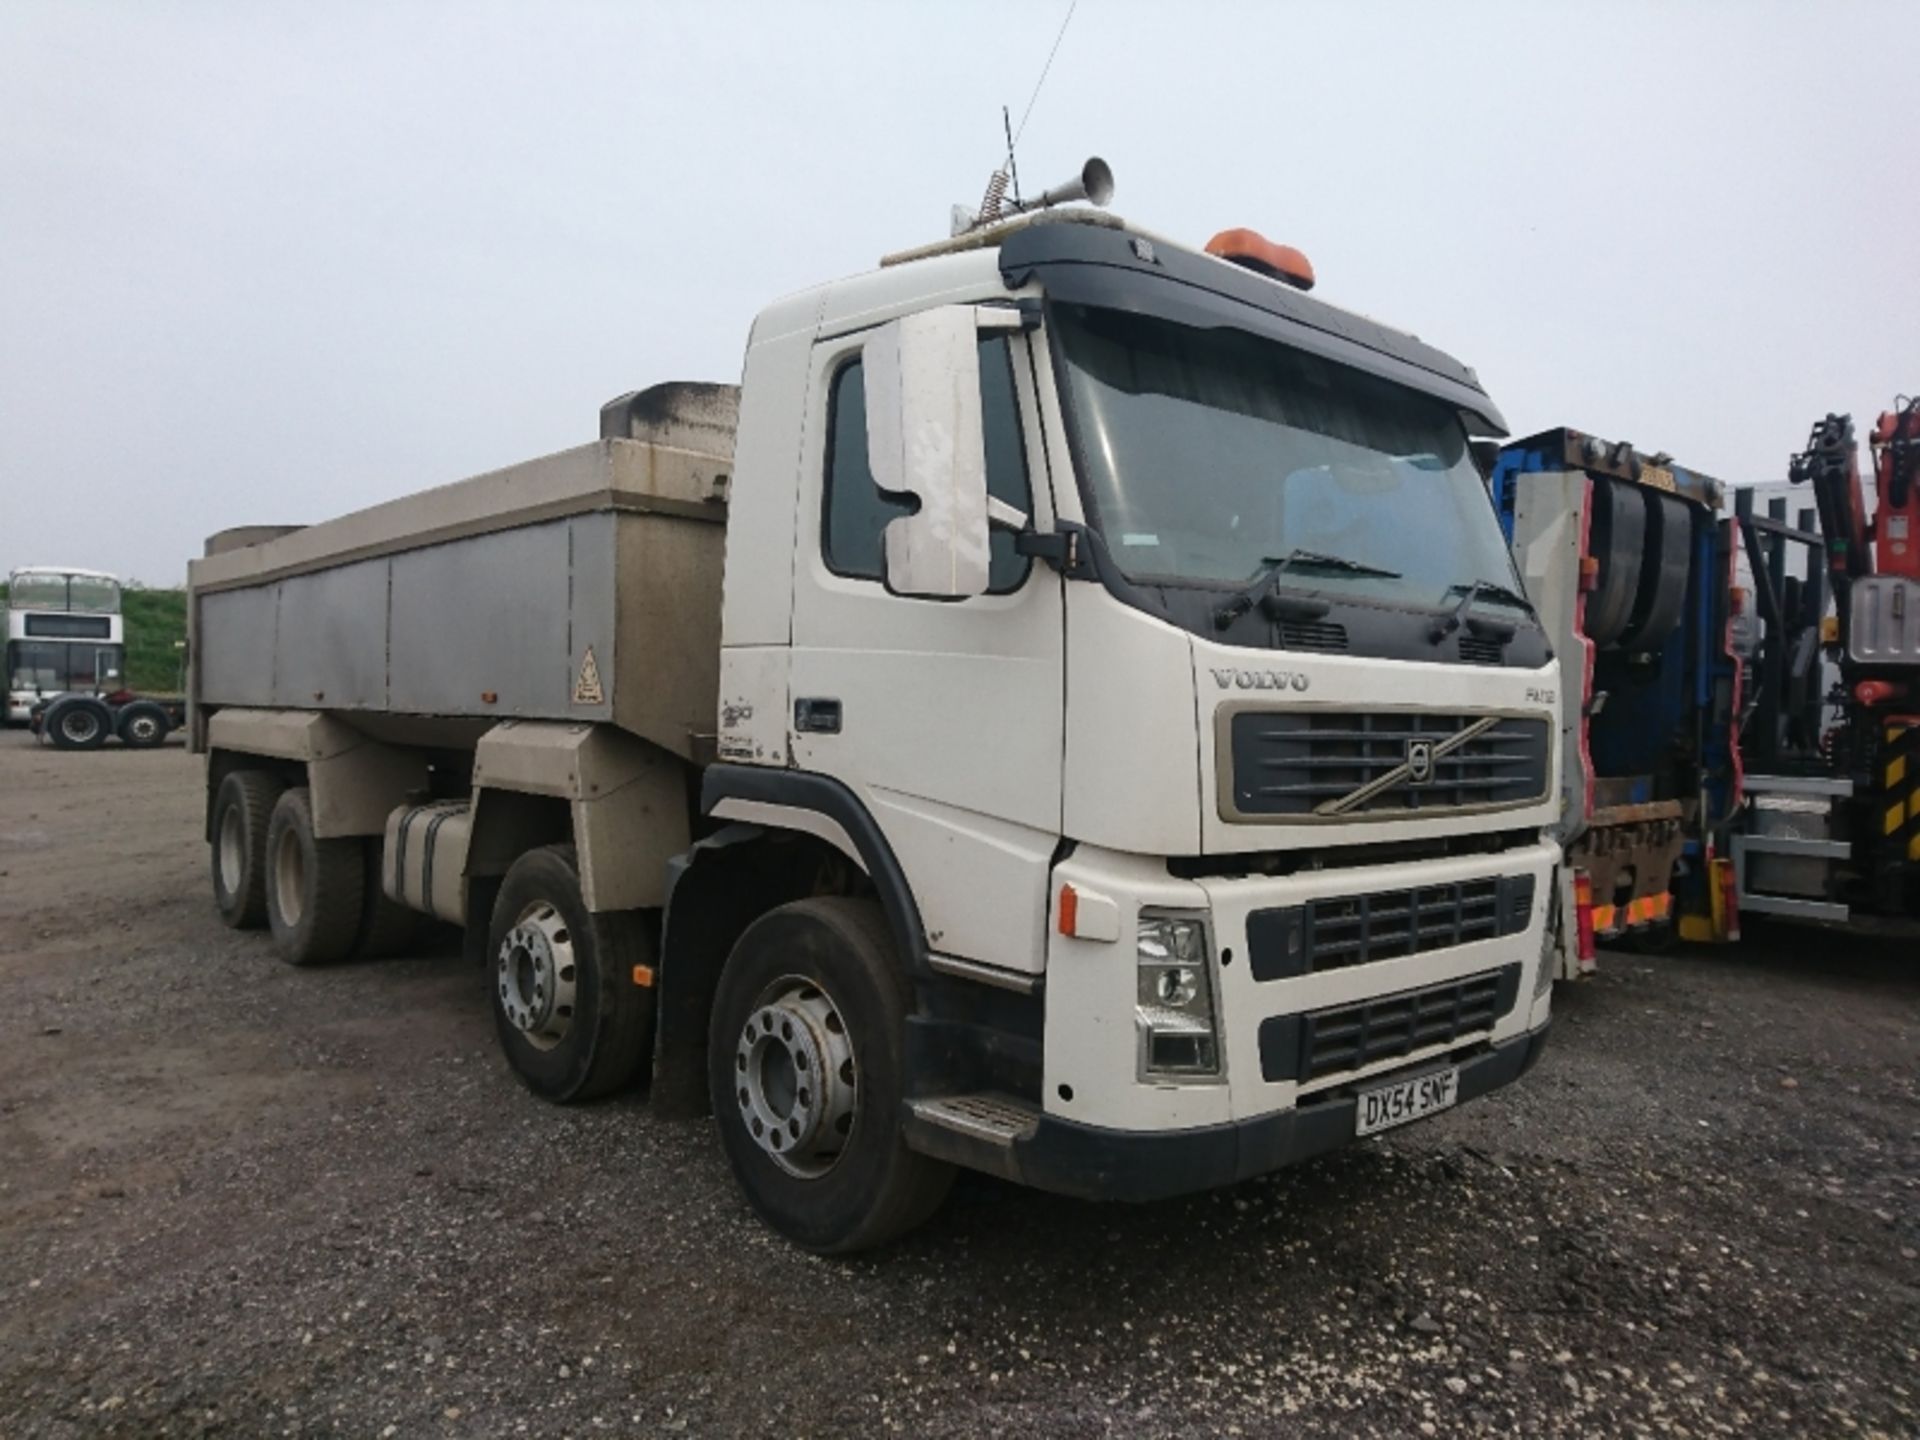 VOLVO FM 460 - 12130cc Day Cab Diesel - VIN: YV2JP40G15A593279 - Year: 2004 - 706,000 km - 8x4 Alloy - Image 2 of 8